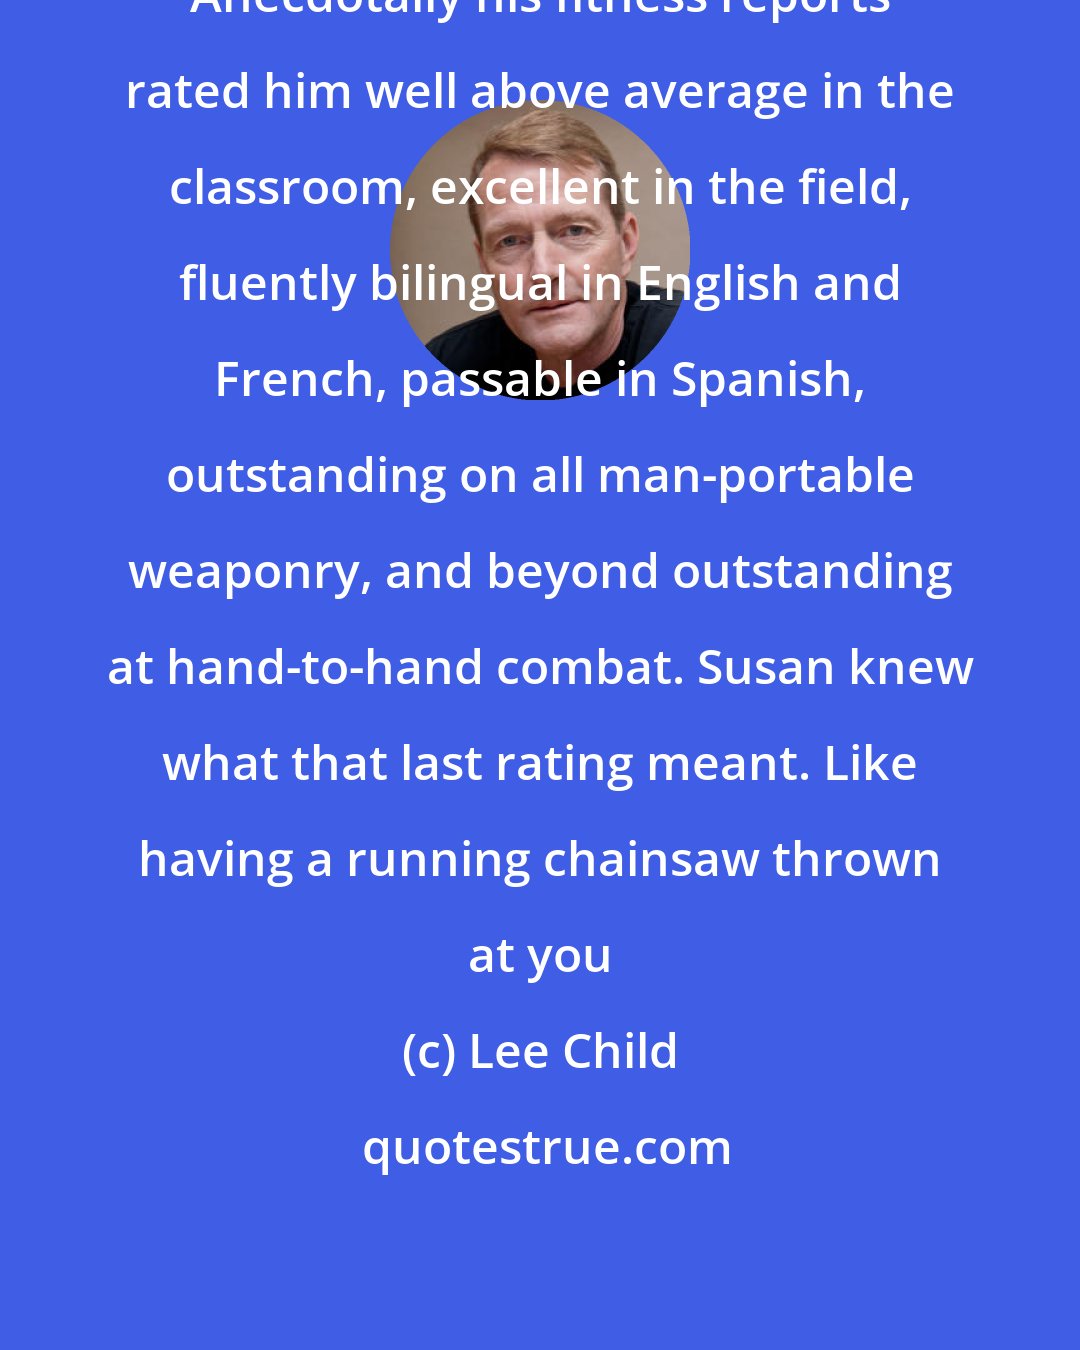 Lee Child: Anecdotally his fitness reports rated him well above average in the classroom, excellent in the field, fluently bilingual in English and French, passable in Spanish, outstanding on all man-portable weaponry, and beyond outstanding at hand-to-hand combat. Susan knew what that last rating meant. Like having a running chainsaw thrown at you